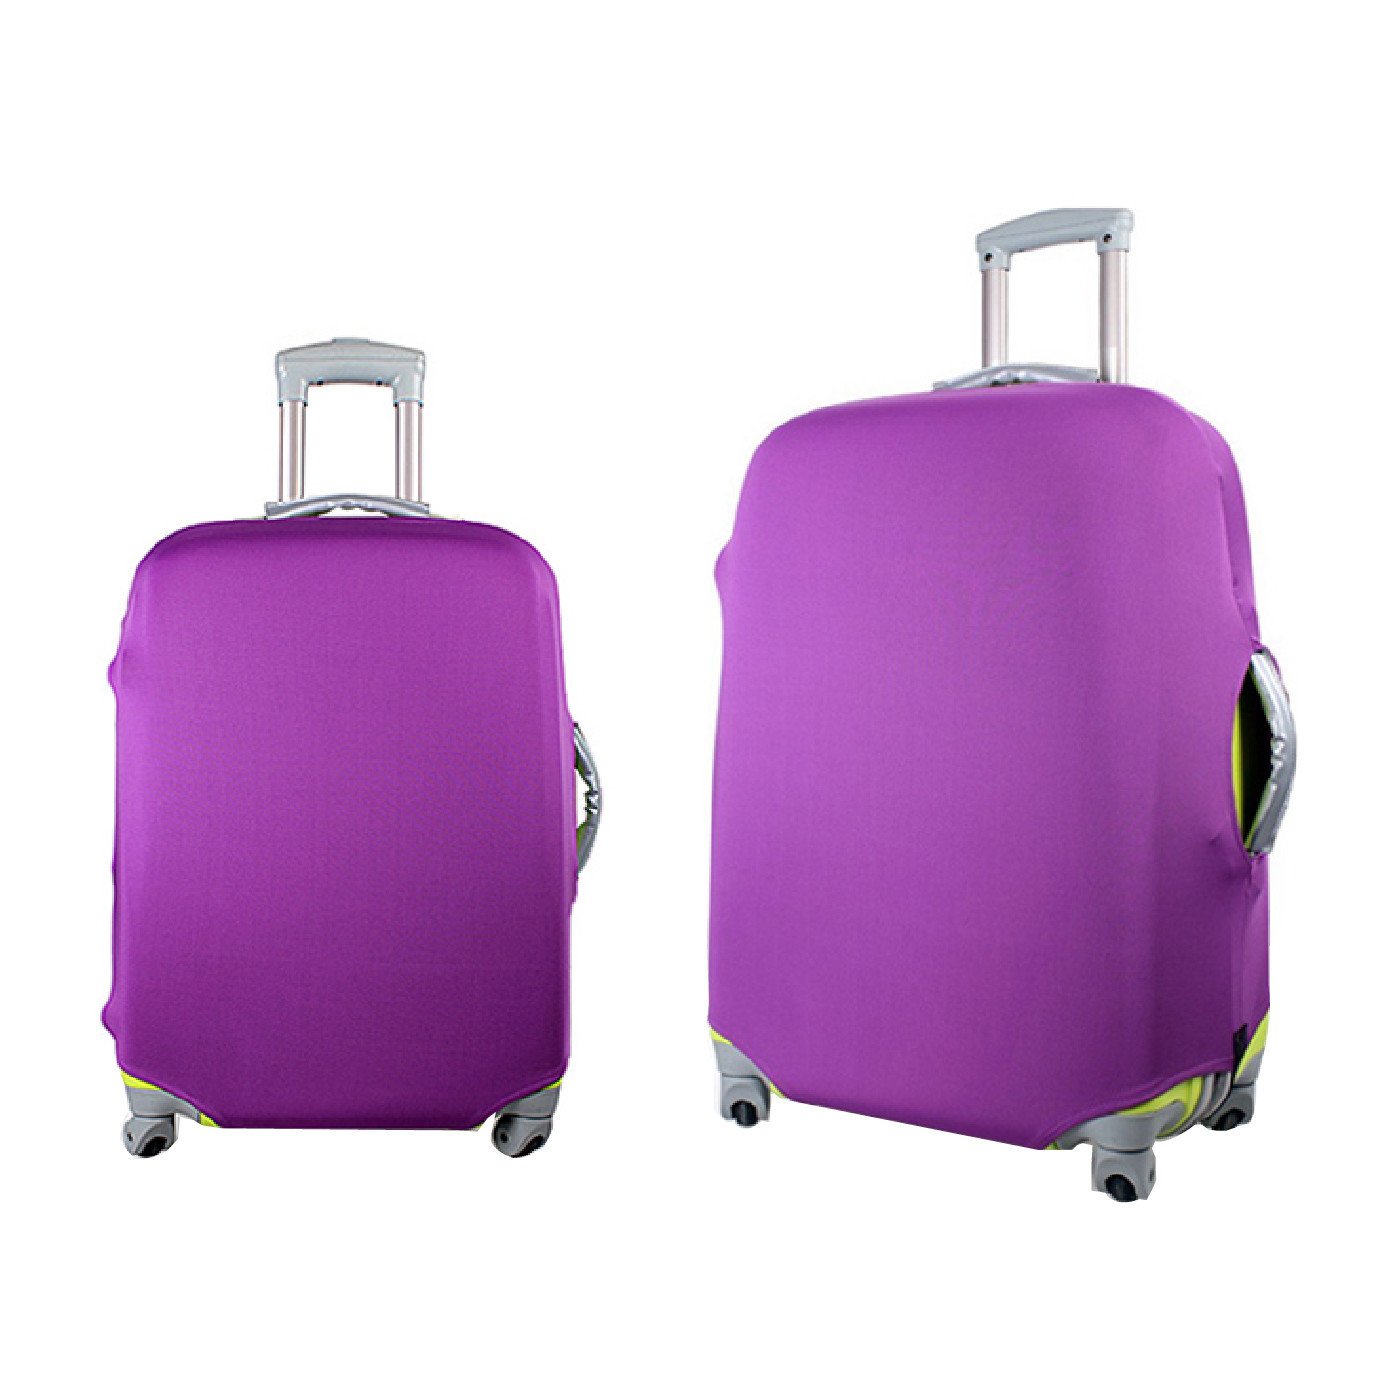 Shoppy SAFEBET Stretchable Protection Luggage Cover